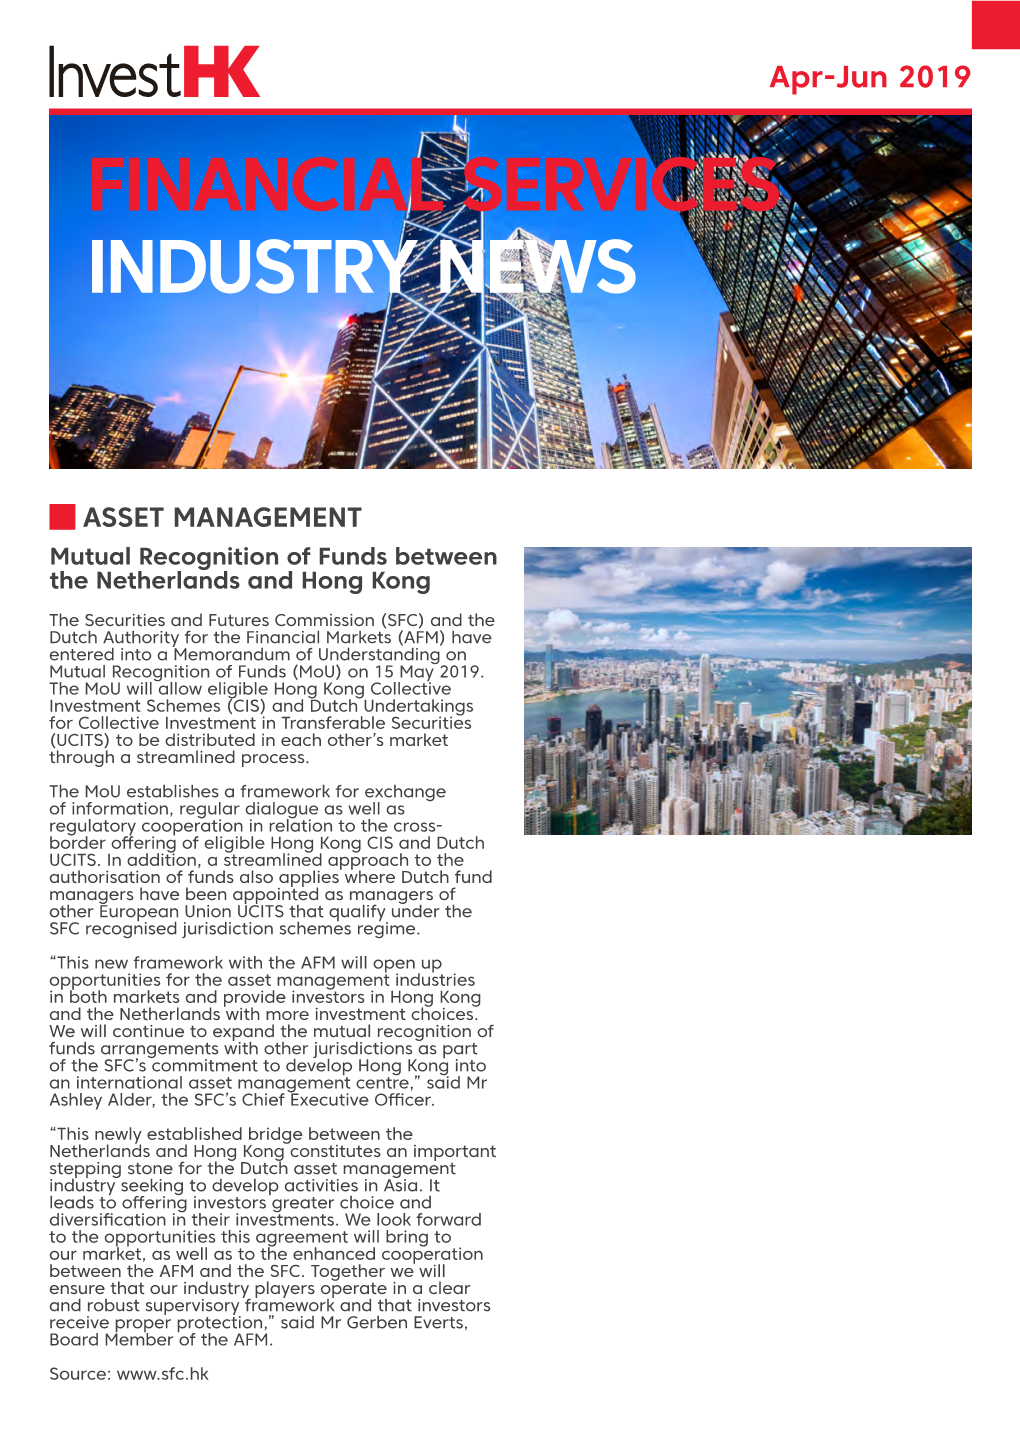 Financial Services Industry News